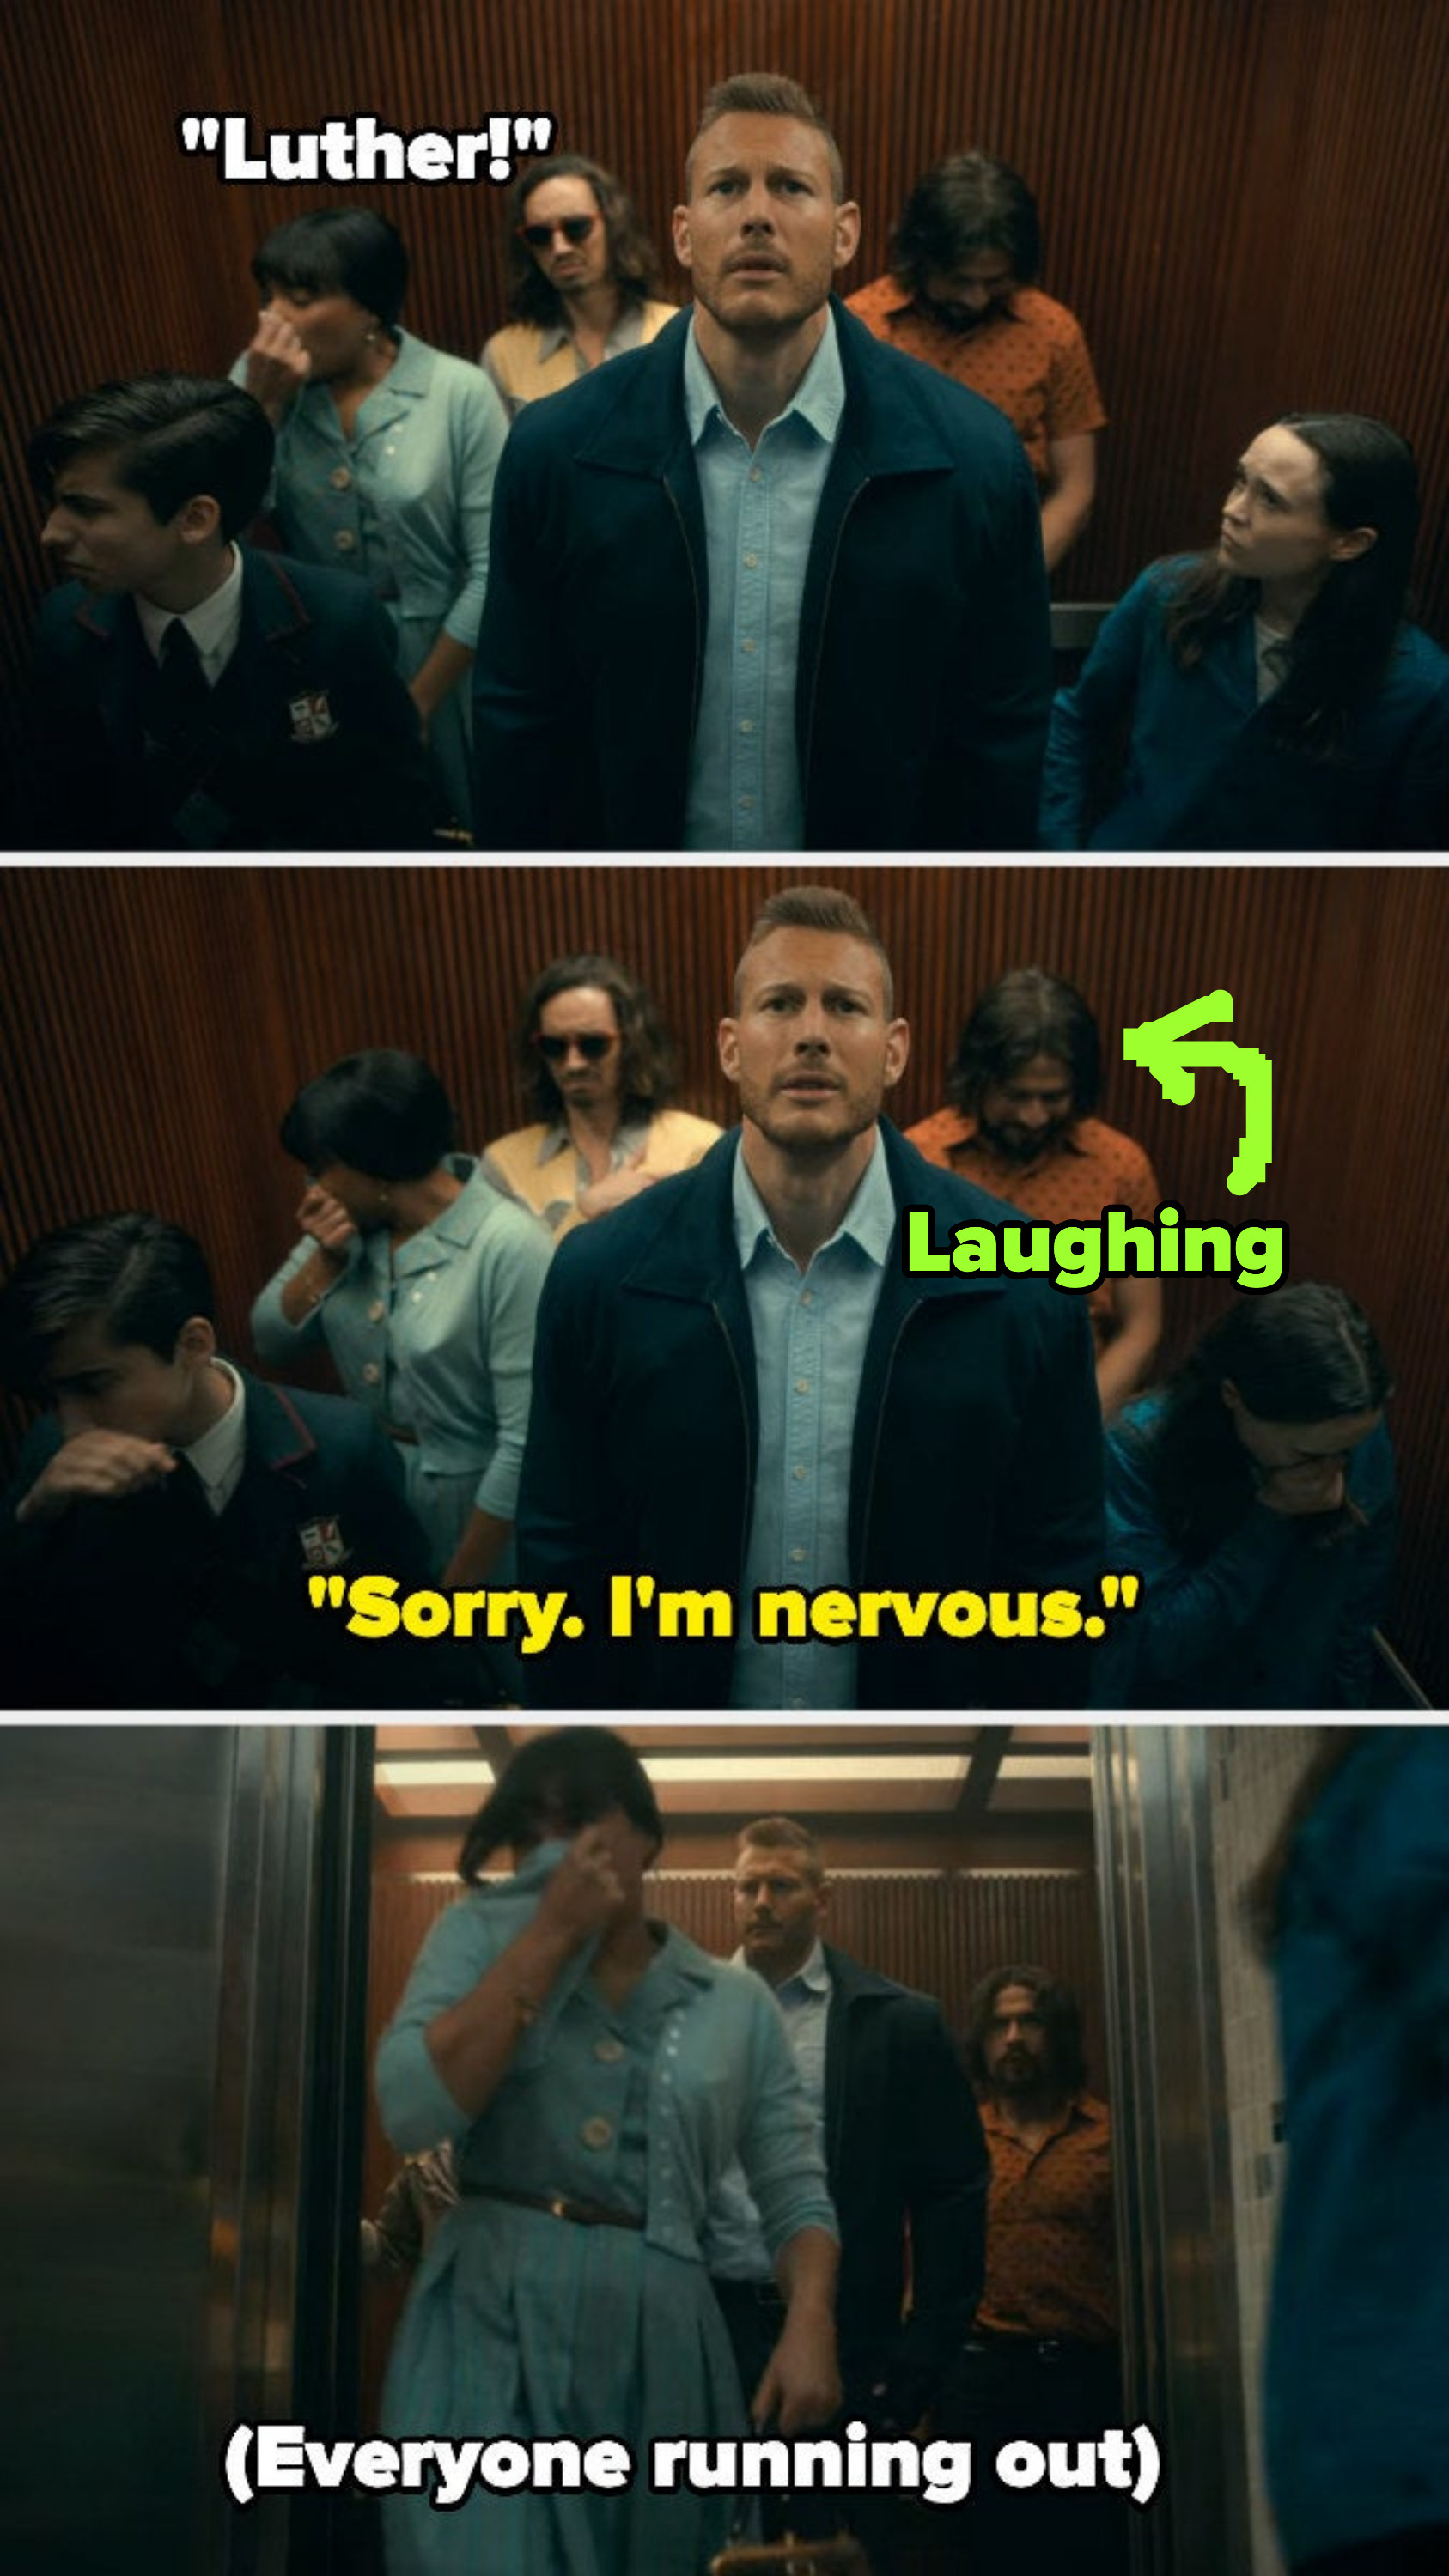 People in the elevator laughing and then running out after Luther says &quot;Sorry, I&#x27;m nervous&quot;